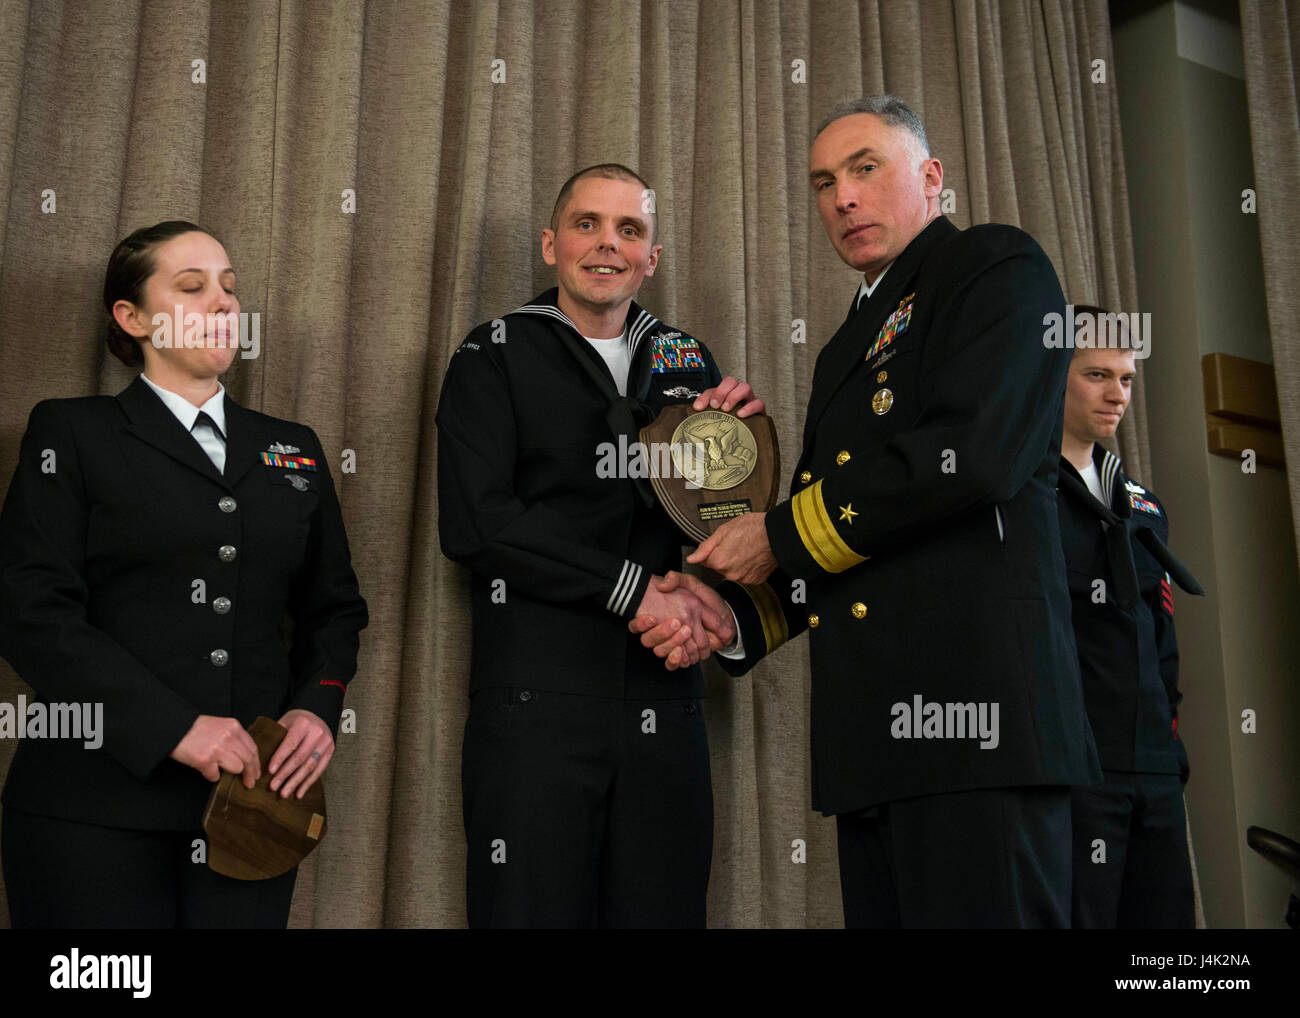 BANGOR, Wash. (Jan. 29, 2016) Rear Adm. John Tammen, commander, Submarine Group 9, congratulates Information Systems Technician 1st Class Nicholas Stenftenagel, from Jasper, Indiana, assigned to Priority Material Office (PMO) Bremerton, on becoming the 2016 Commander, Submarine Group Nine Shore Sailor of the Year. He will move on to participate in the Commander Submarine Force, U.S. Pacific Fleet (SUBPAC) Sailor of the Year competition, which will kick off next month in San Diego. (U.S. Navy photo by Mass Communication Specialist 1st Class Amanda R. Gray/Released) Stock Photo